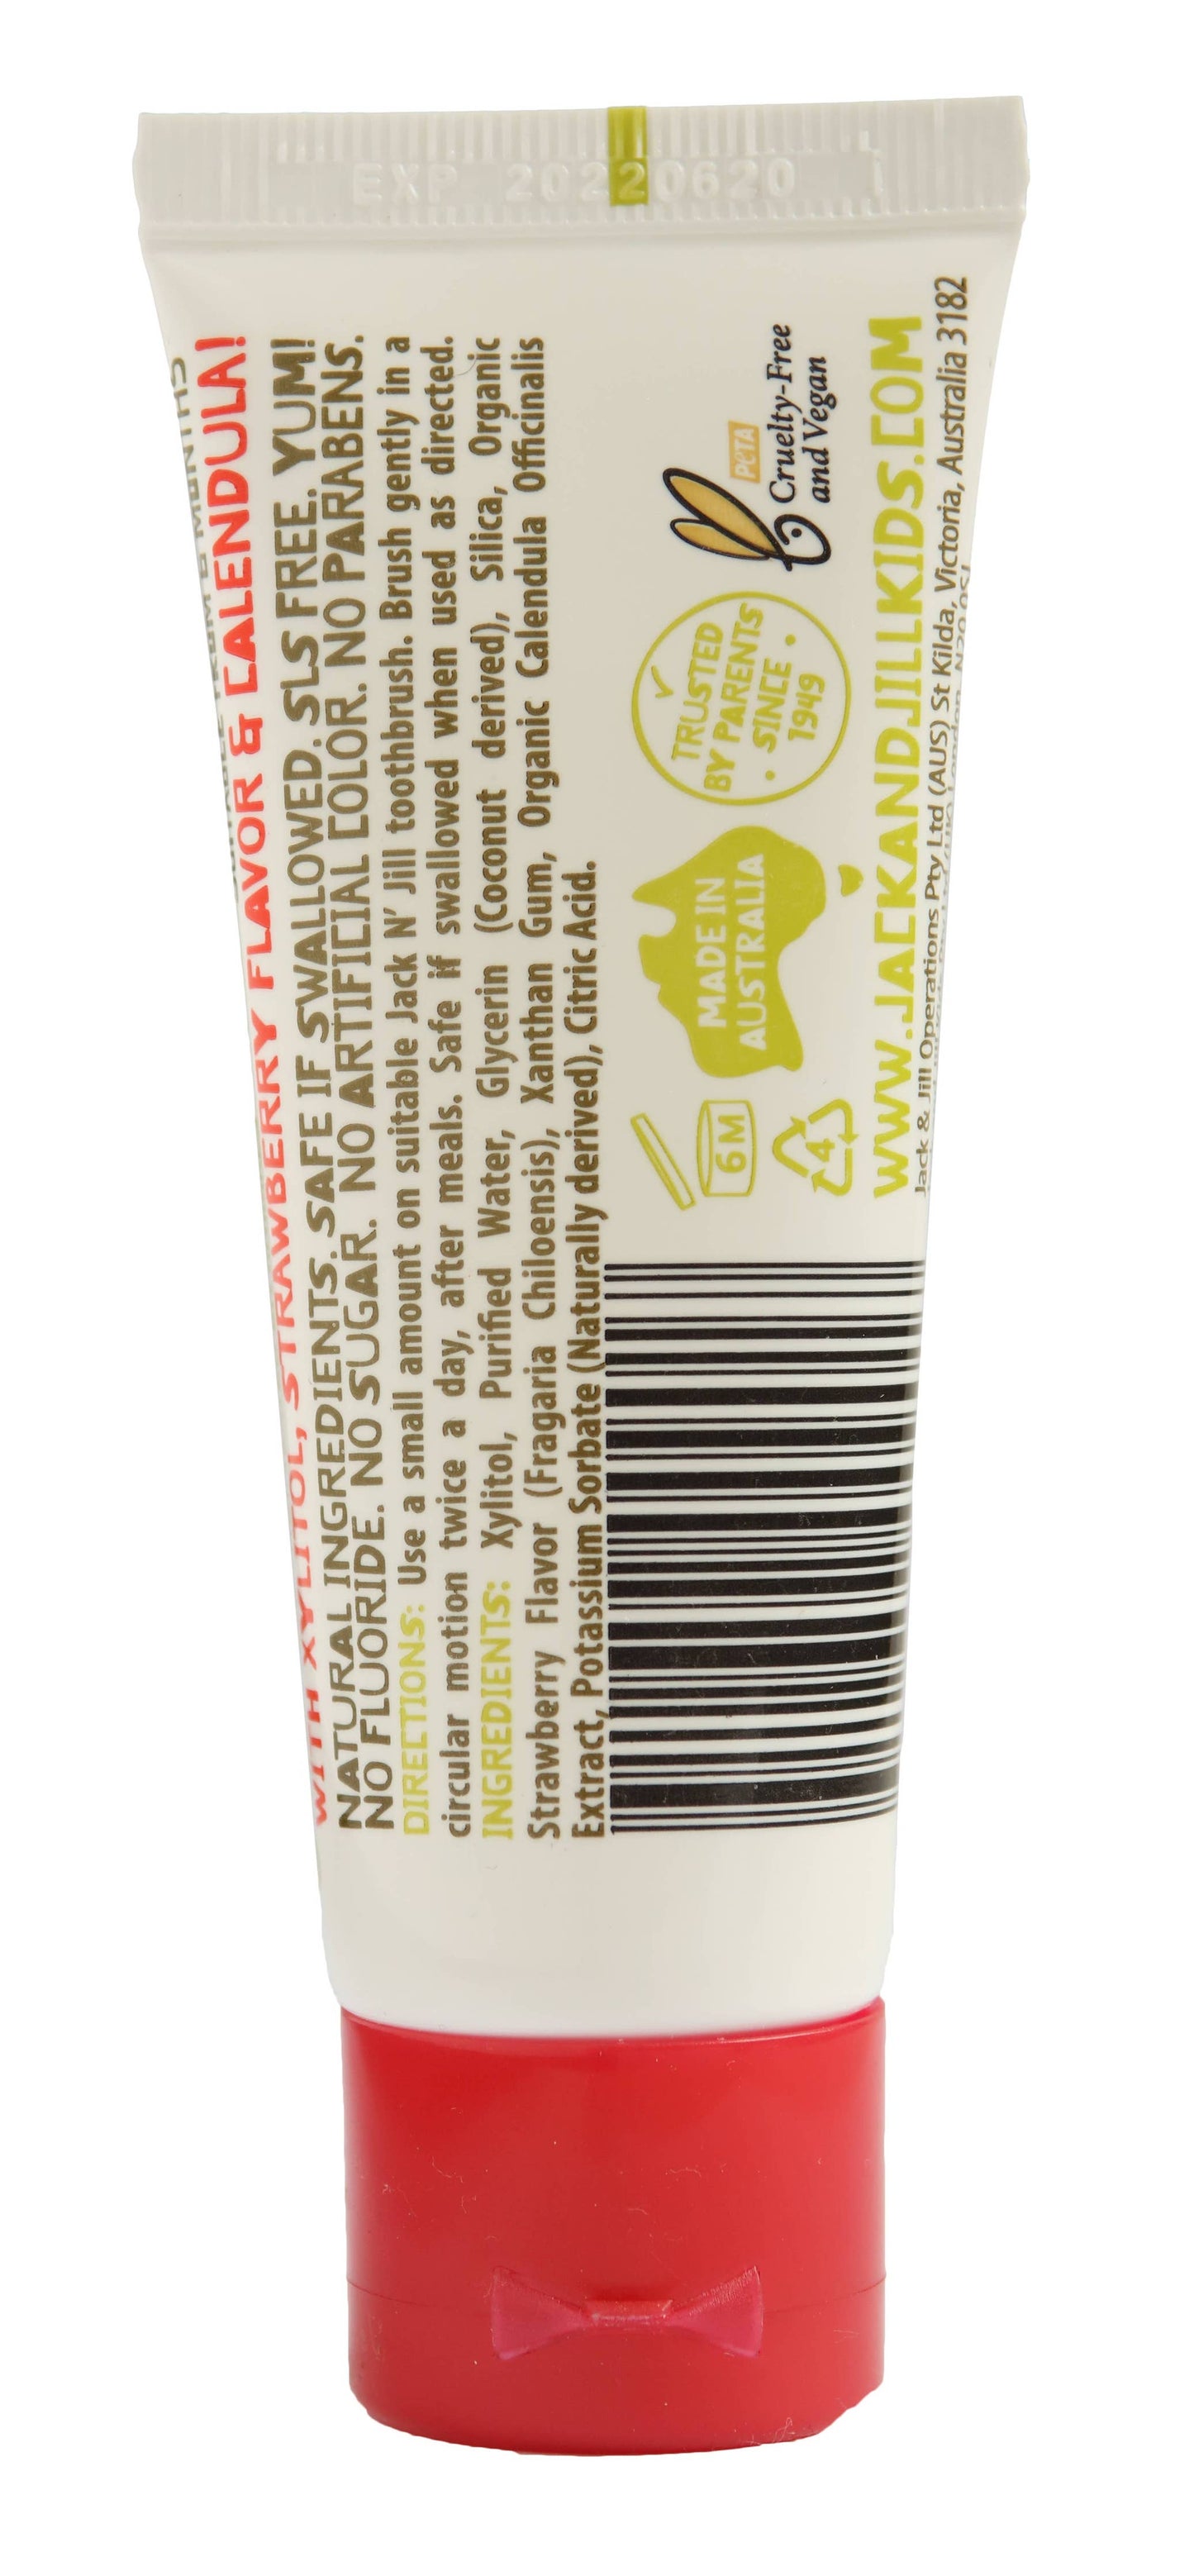 Strawberry Jack N' Jill Natural Toothpaste